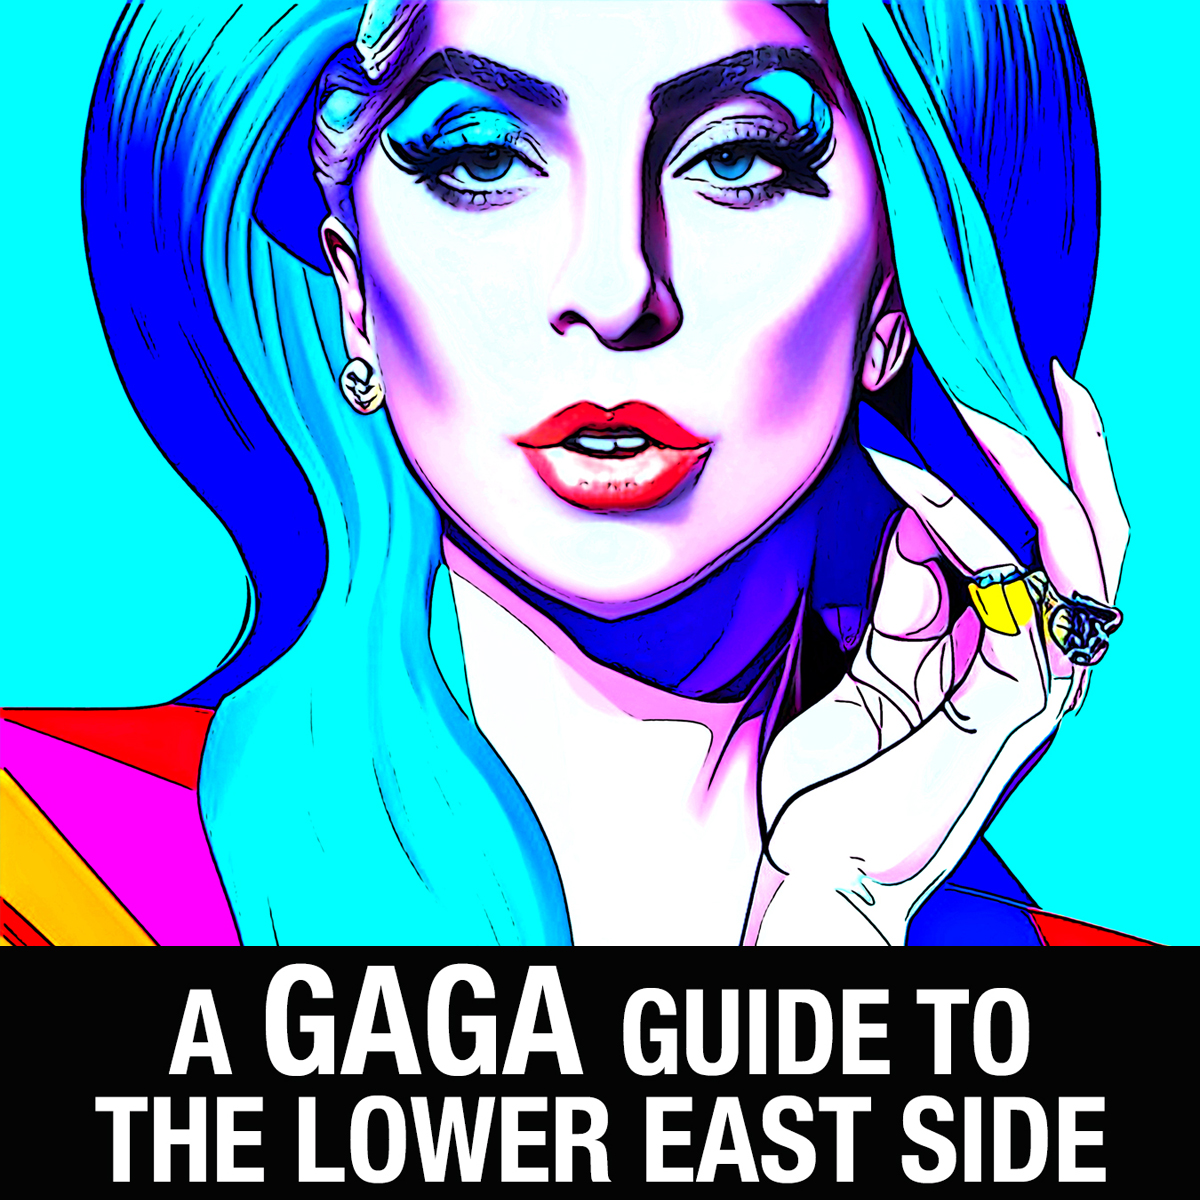 Spin Cycle presents the return of A GAGA GUIDE TO THE LOWER EAST SIDE, a unique immersive theater experience that blends actual historical walking tour, theatrical character monologue and the culture surrounding Lady Gaga. Enter to win a pair of tickets! t.dostuffmedia.com/t/c/s/143961